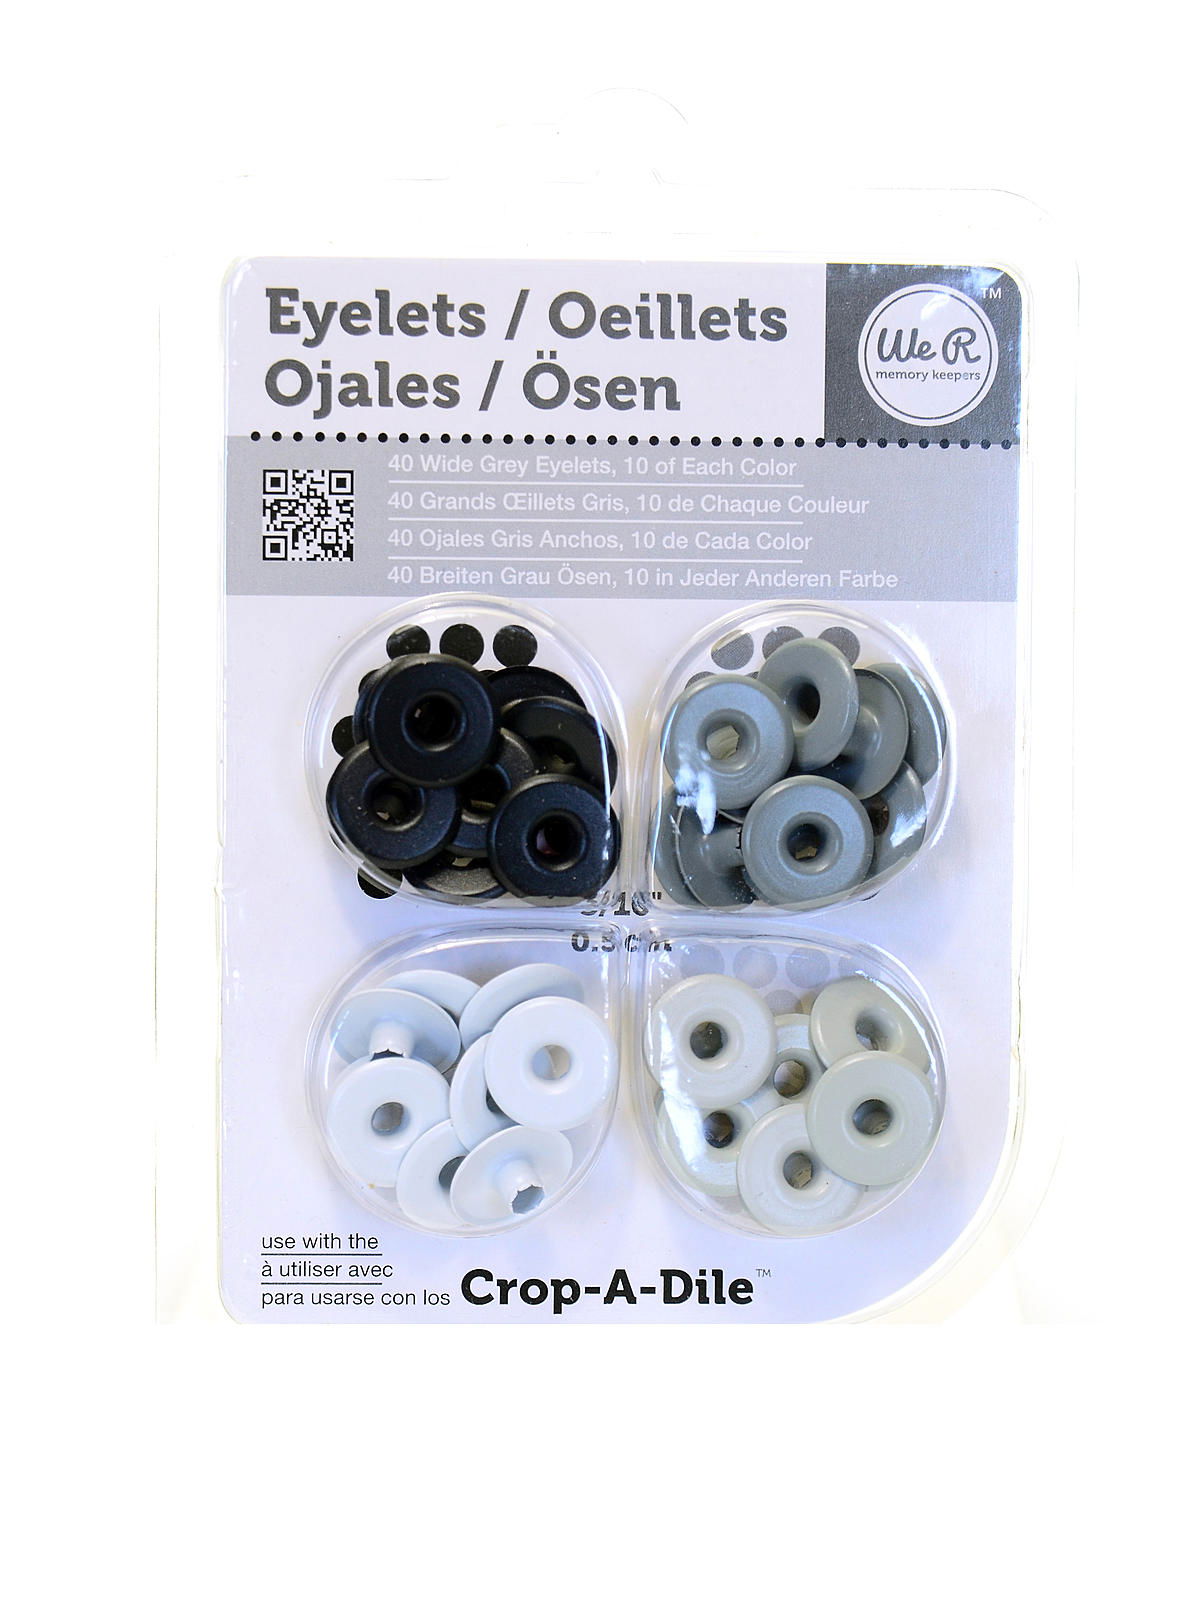 We R Memory Keepers- Crop-A-Dile for Eyelets